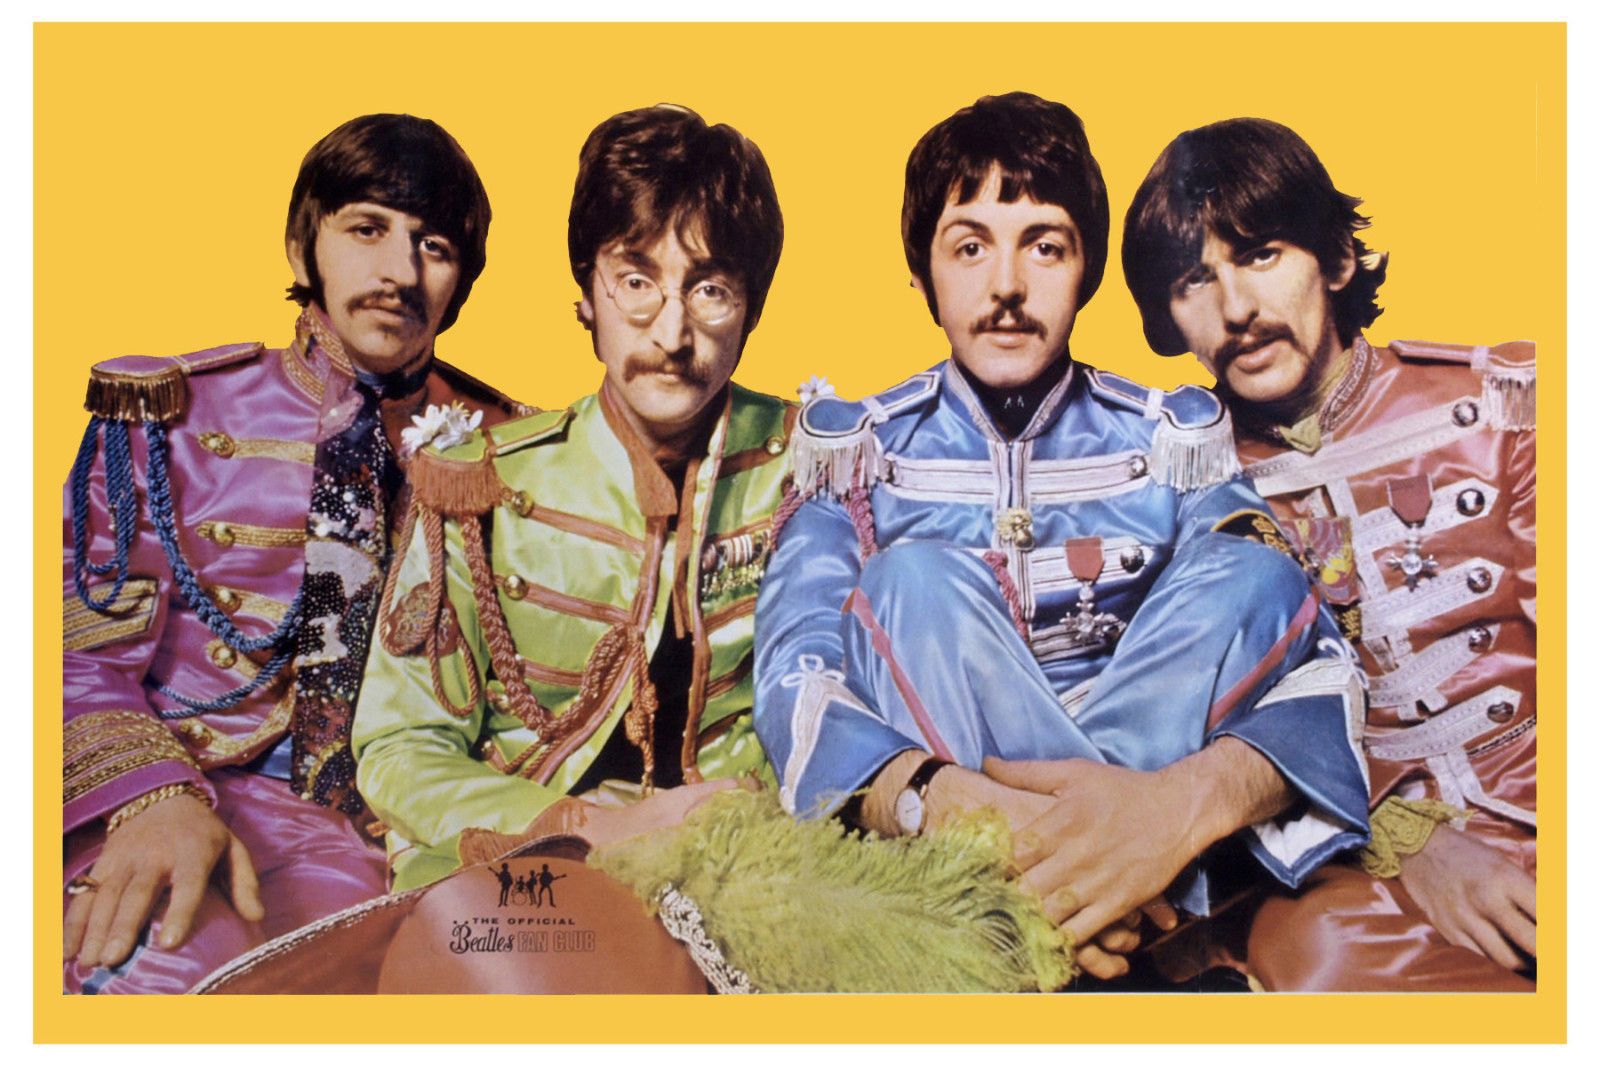 Music Monday: Sgt. Pepper’s Lonely Hearts Club Band 50th Anniversary Box (Part Two)